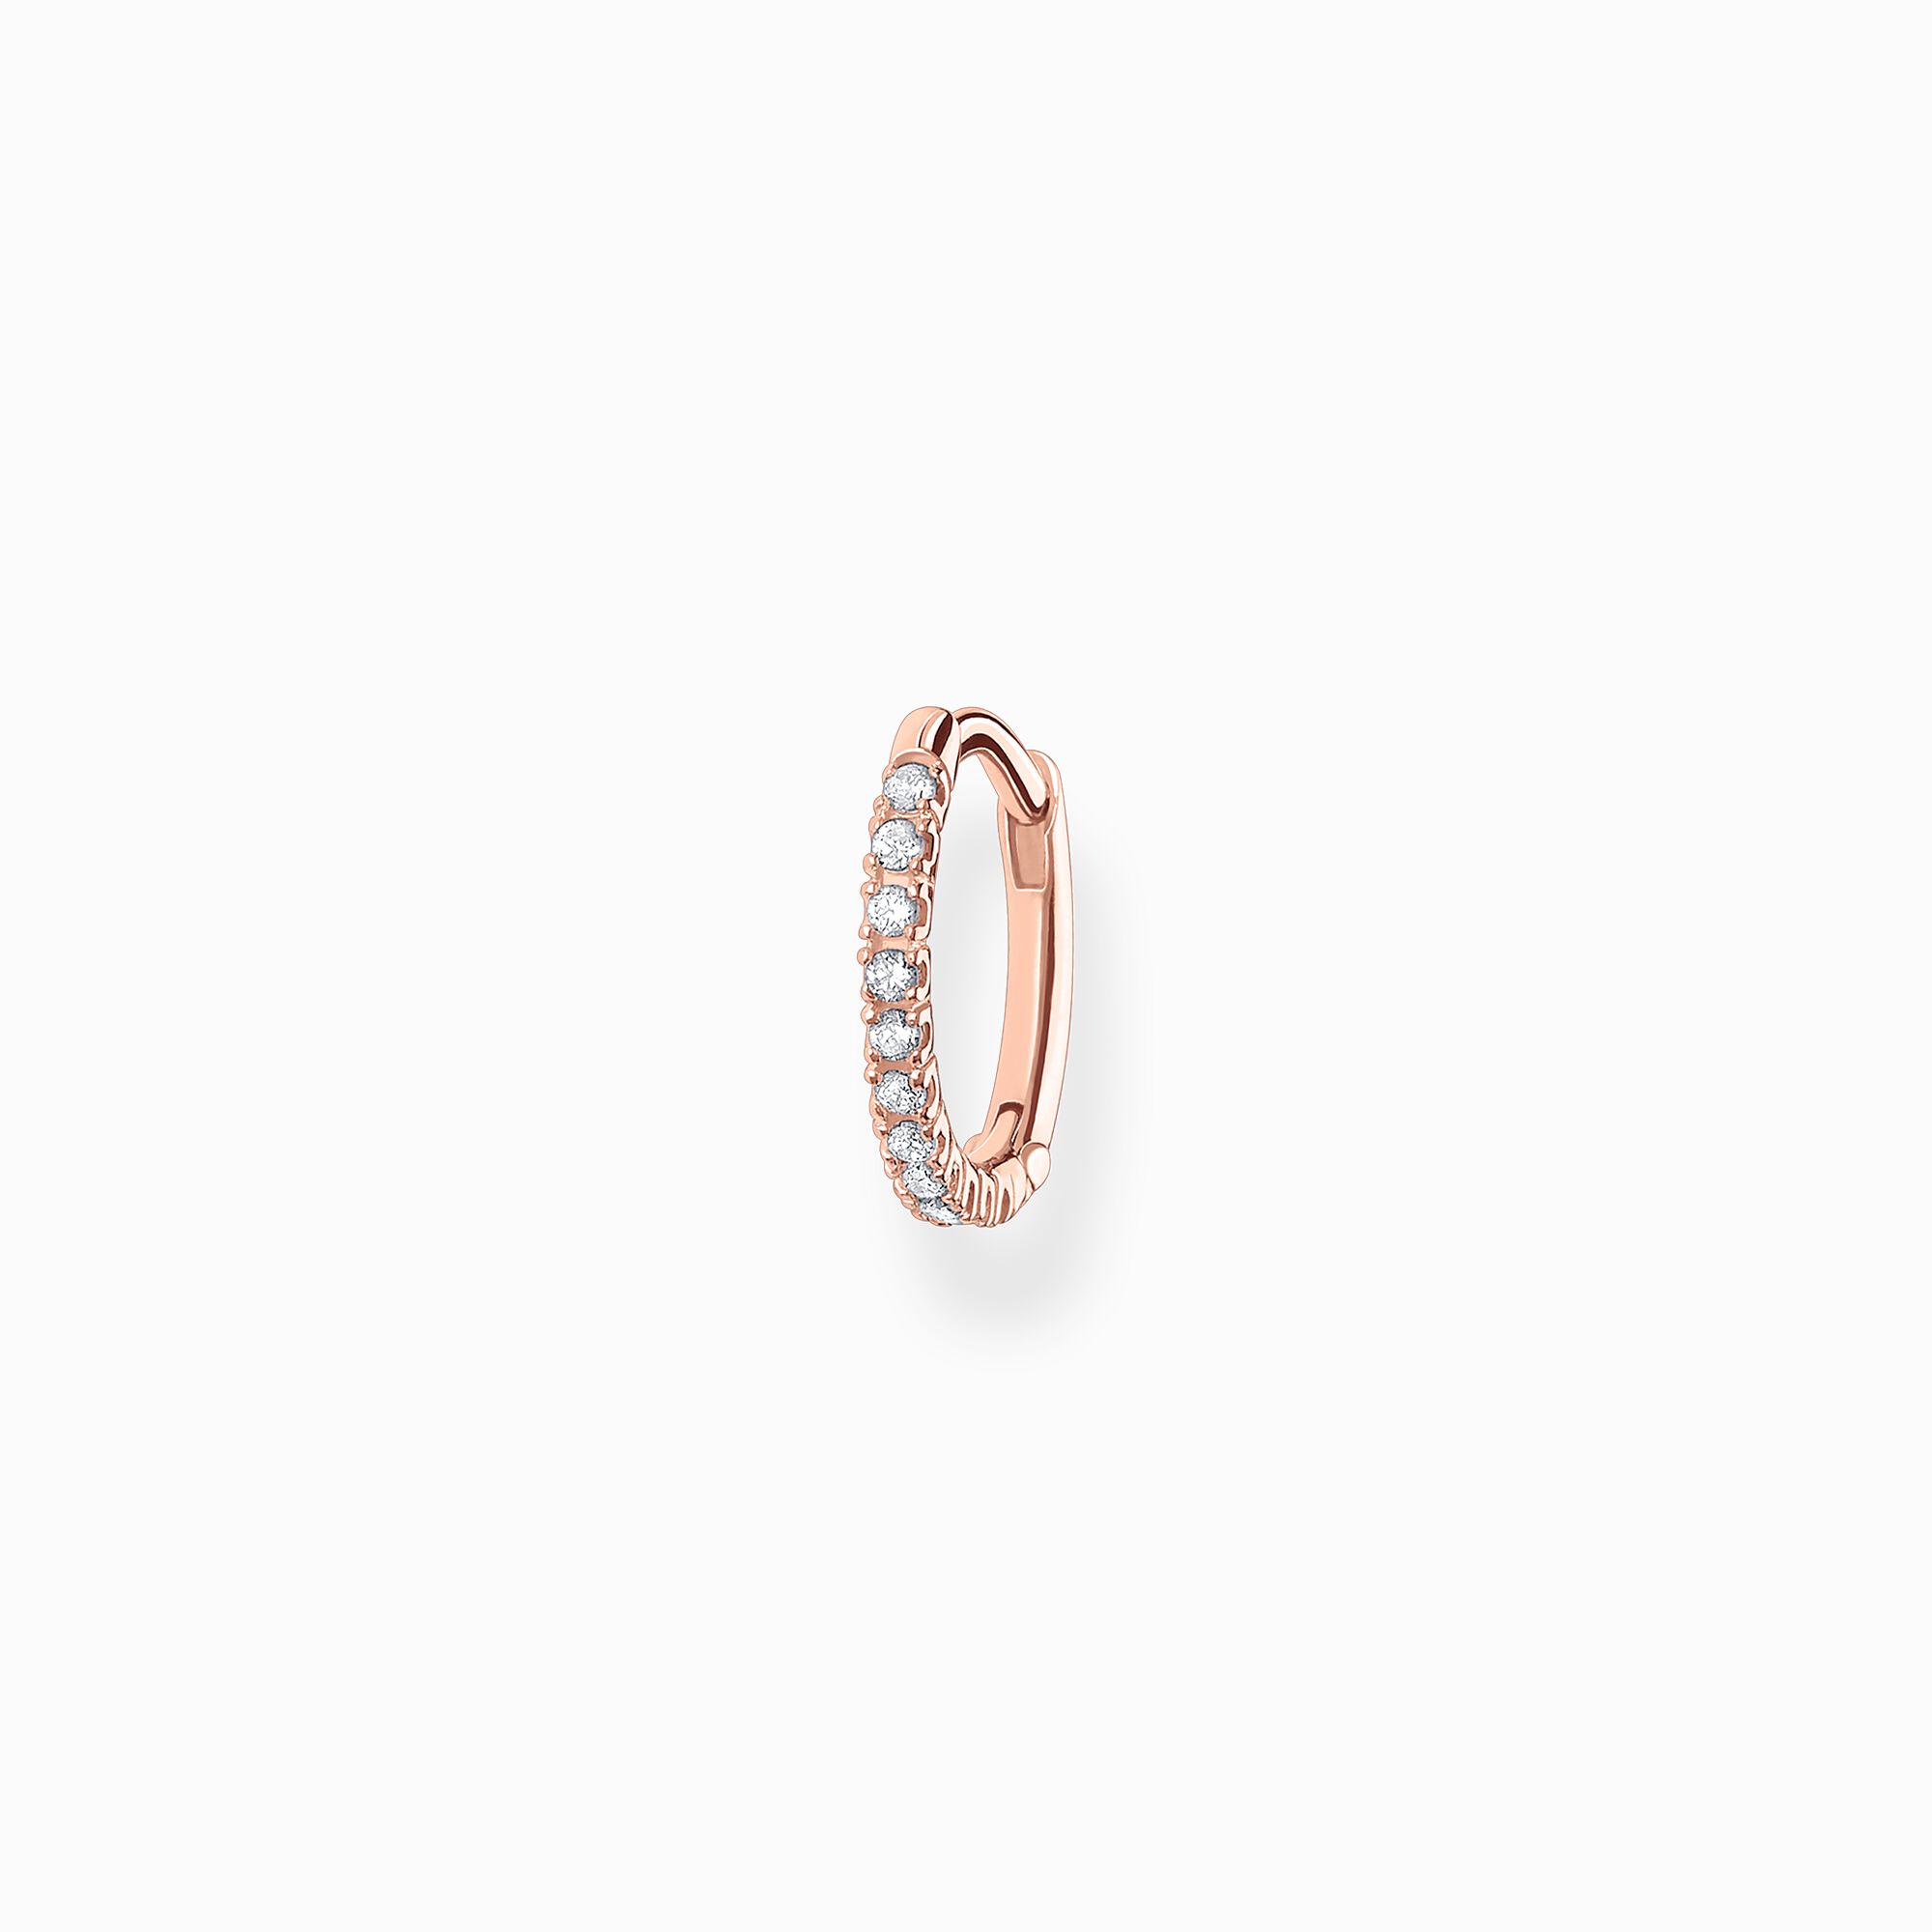 Single hoop earring white stones rose gold from the Charming Collection collection in the THOMAS SABO online store